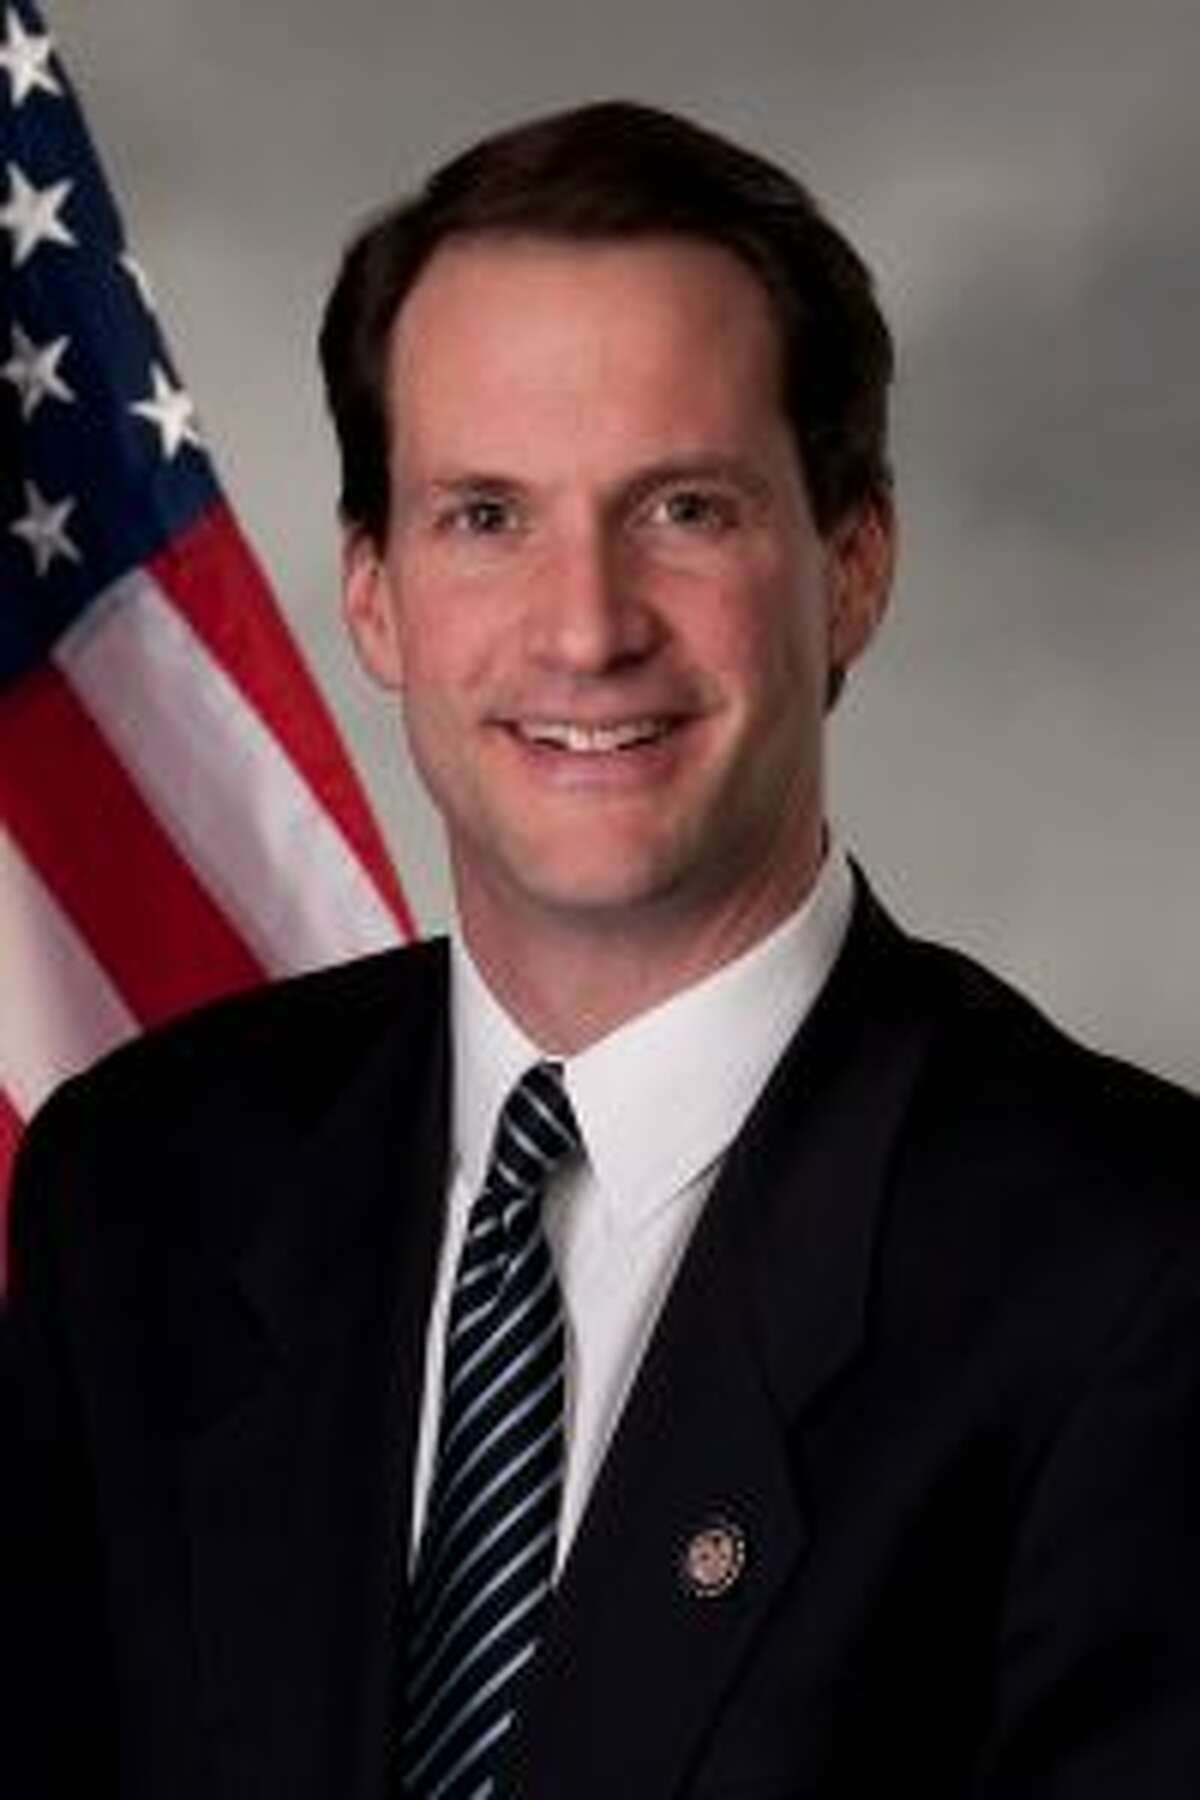 U.S. Congressman Jim Himes (D-CT 4th) will speak at Staying Put in New Canaan’s 10th anniversary event on May 20th at St. Mark’s Church.